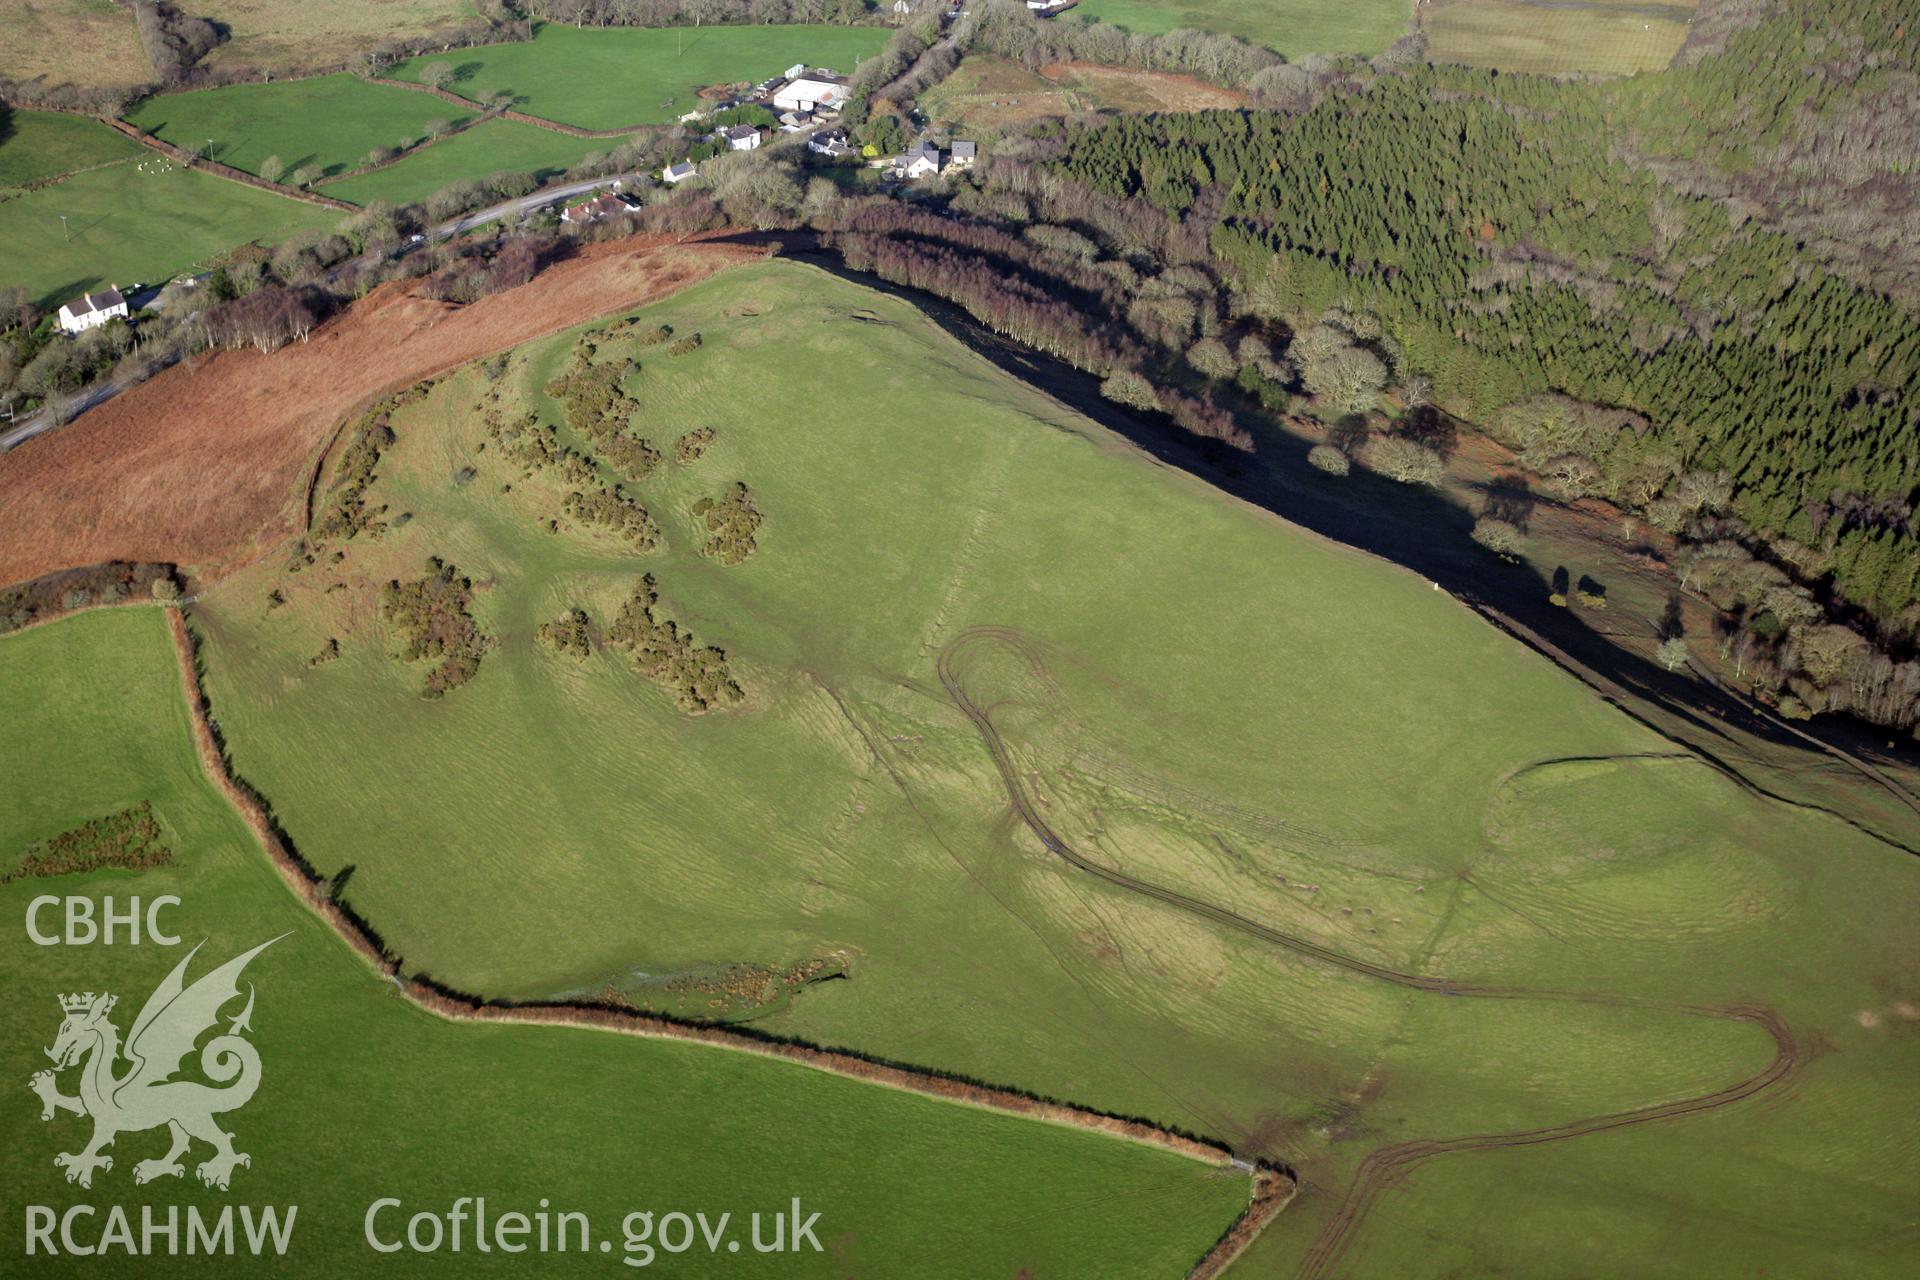 RCAHMW colour oblique photograph of Cil Ifor Promontory Fort. Taken by Toby Driver on 02/02/2012.